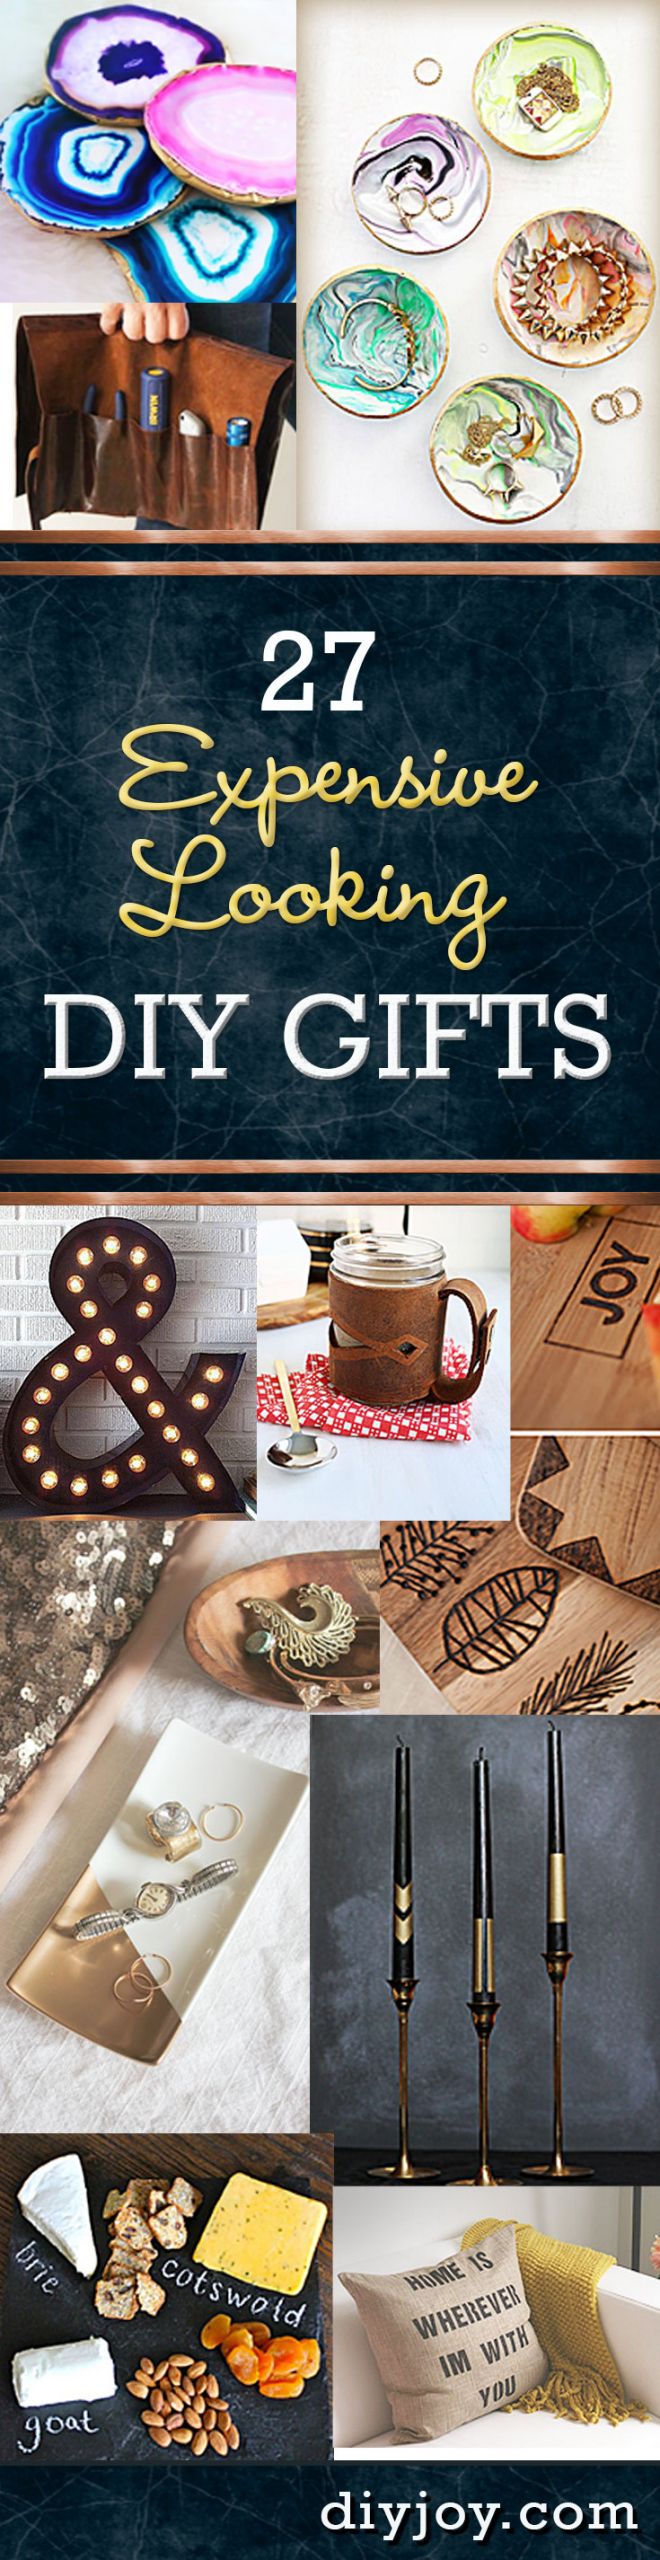 Cool DIY Gifts
 27 Expensive Looking Inexpensive DIY Gifts